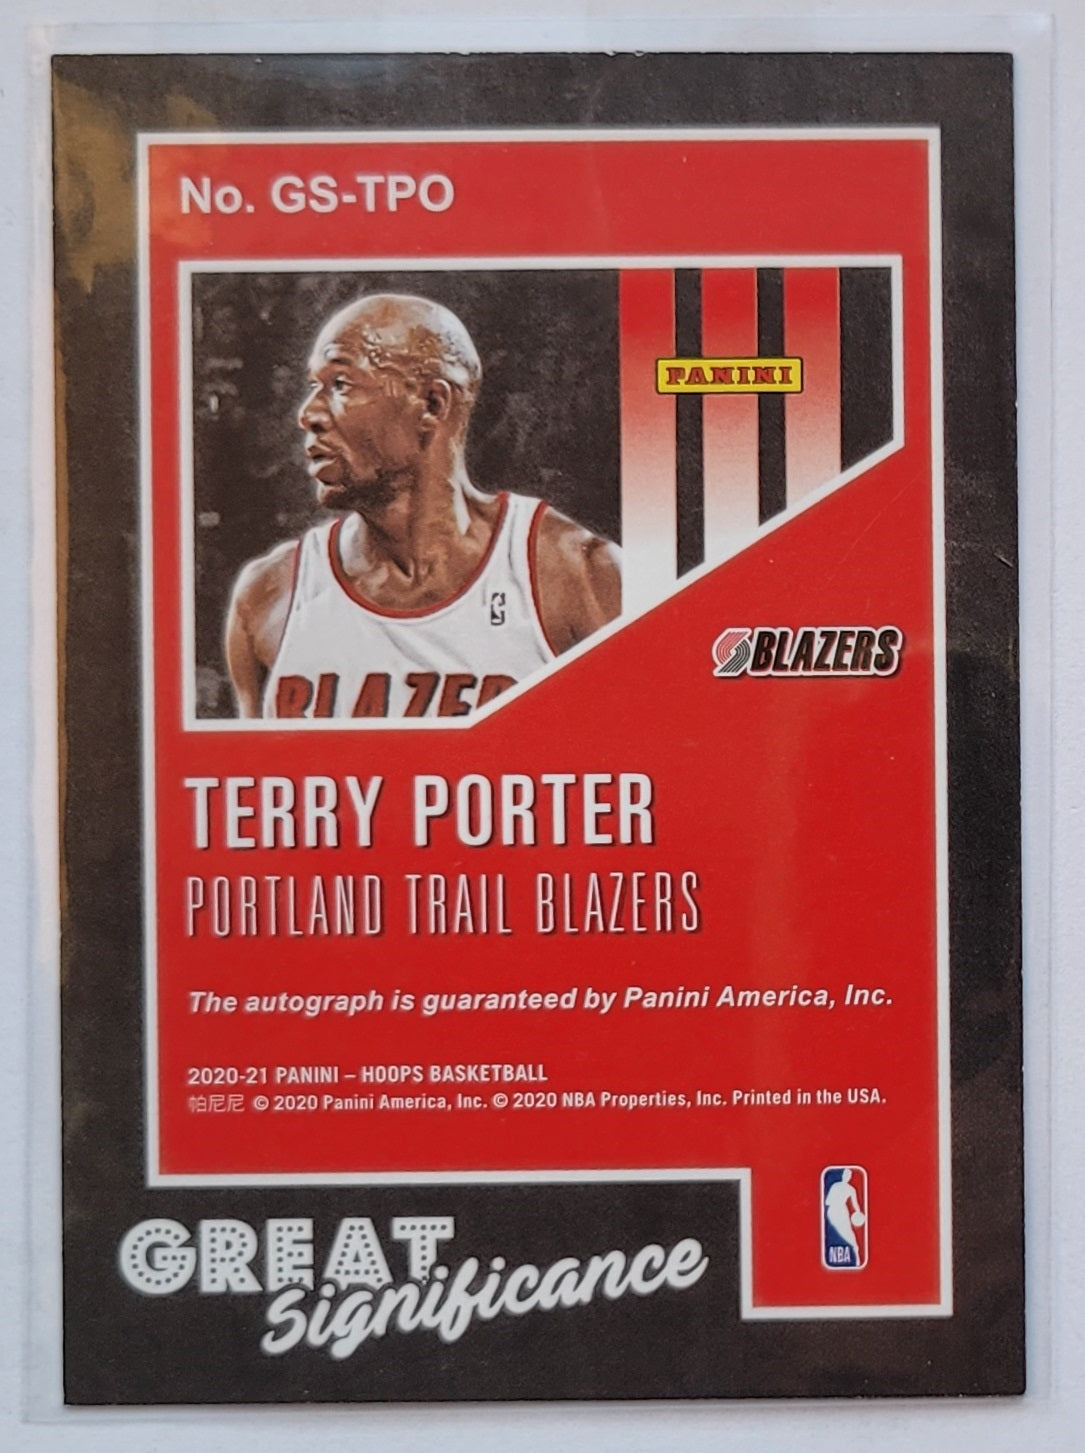 Terry Porter - 2020-21 Hoops Great SIGnificance #GS-TPO